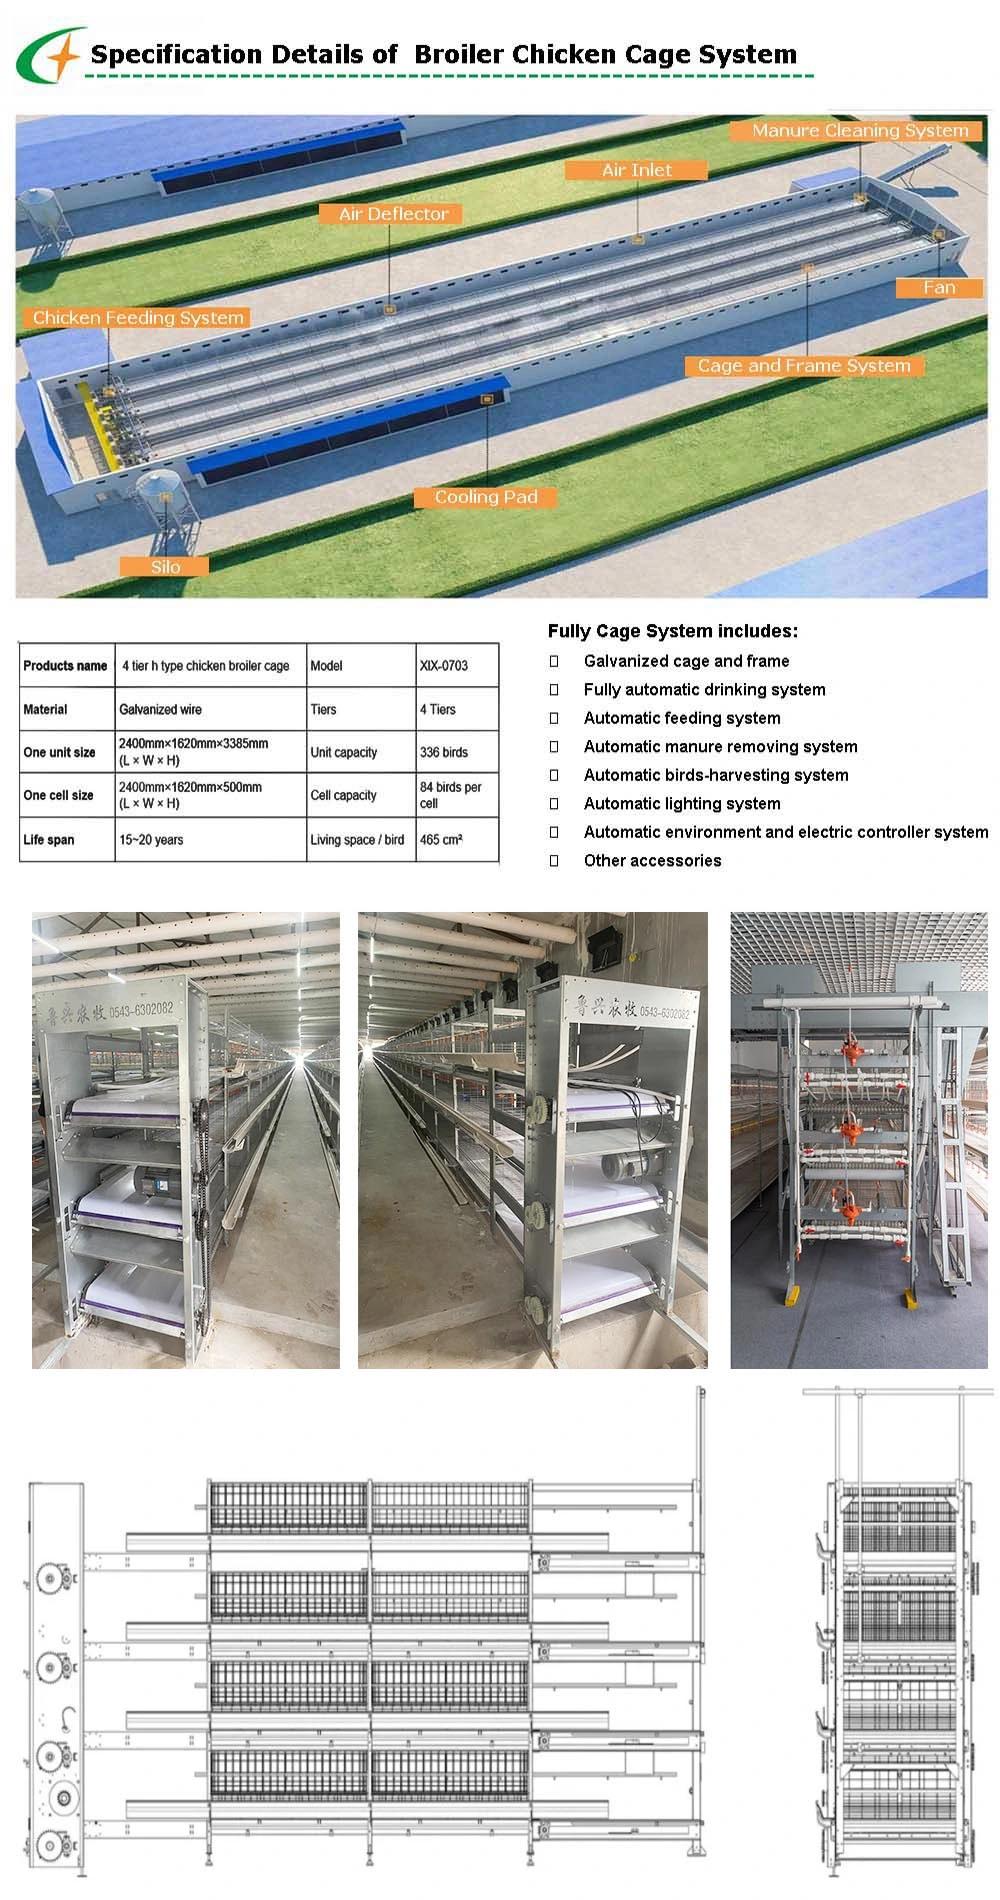 Low Price Poultry Feeding Equipment Automatic Chicken Layer Broiler Feeding equipment